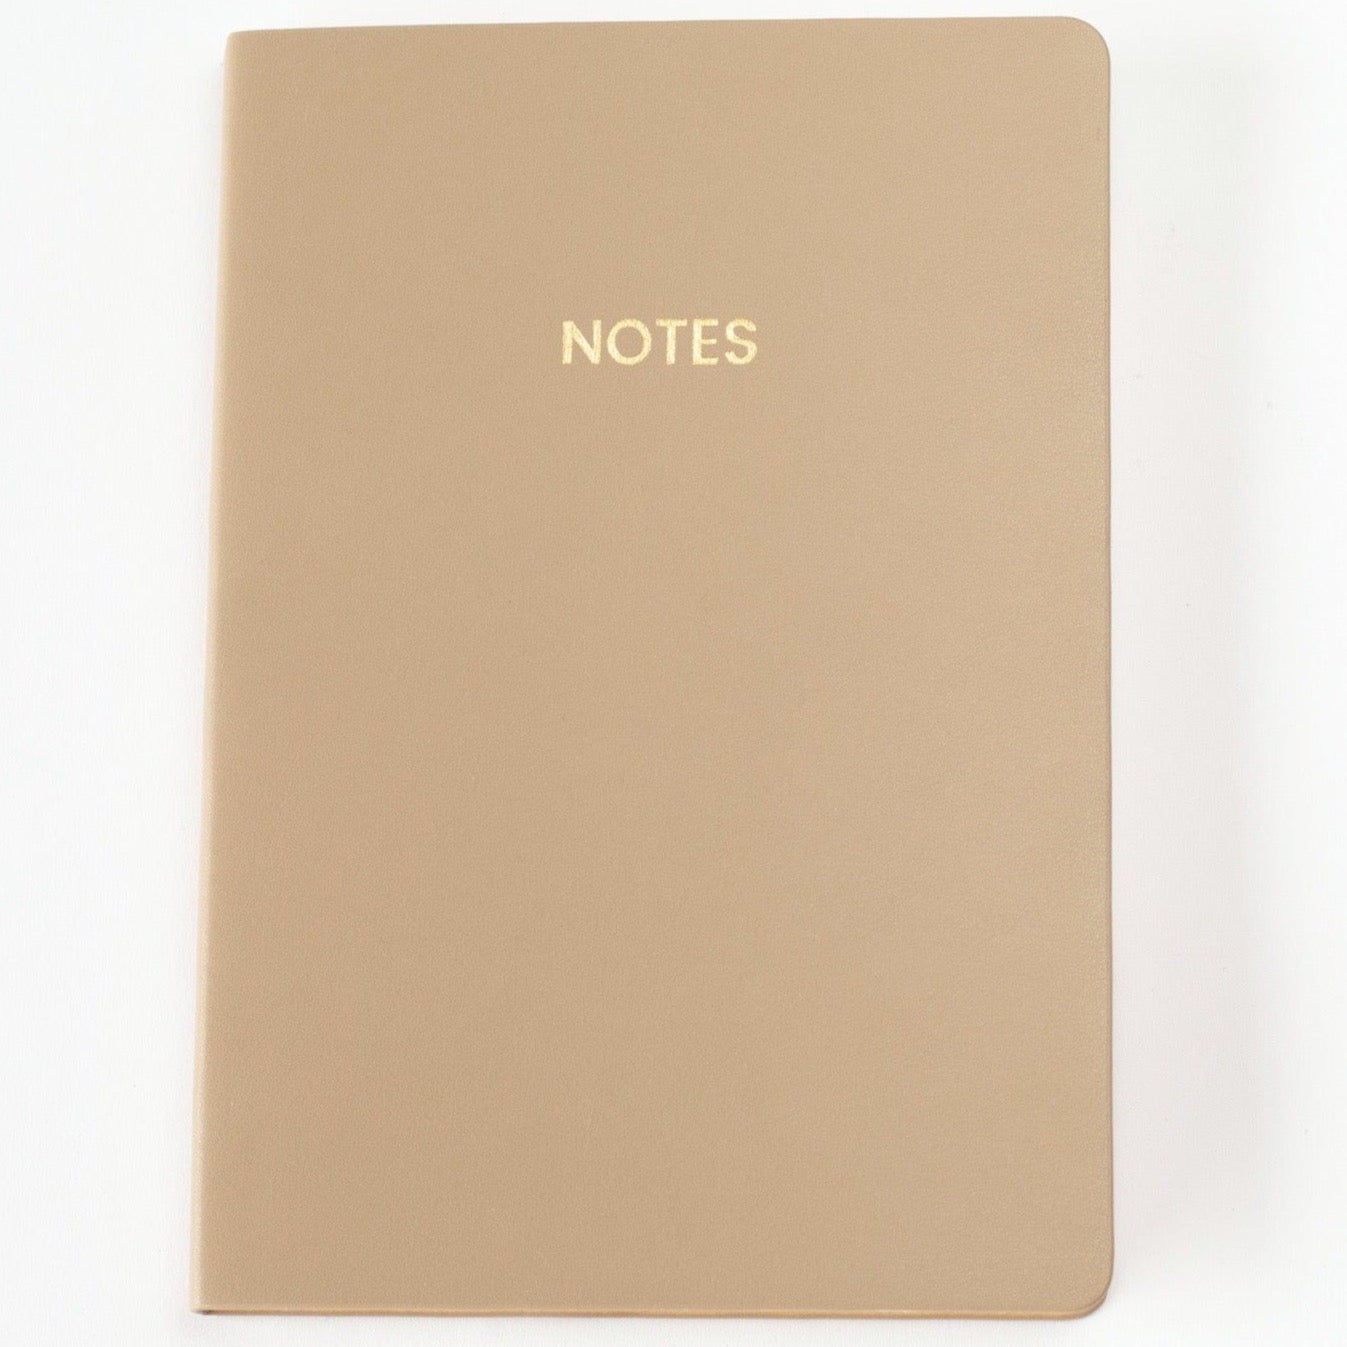 A light brown colored vegan leather notebook with gold foil text reading "NOTES" across the front photographed against a white background.